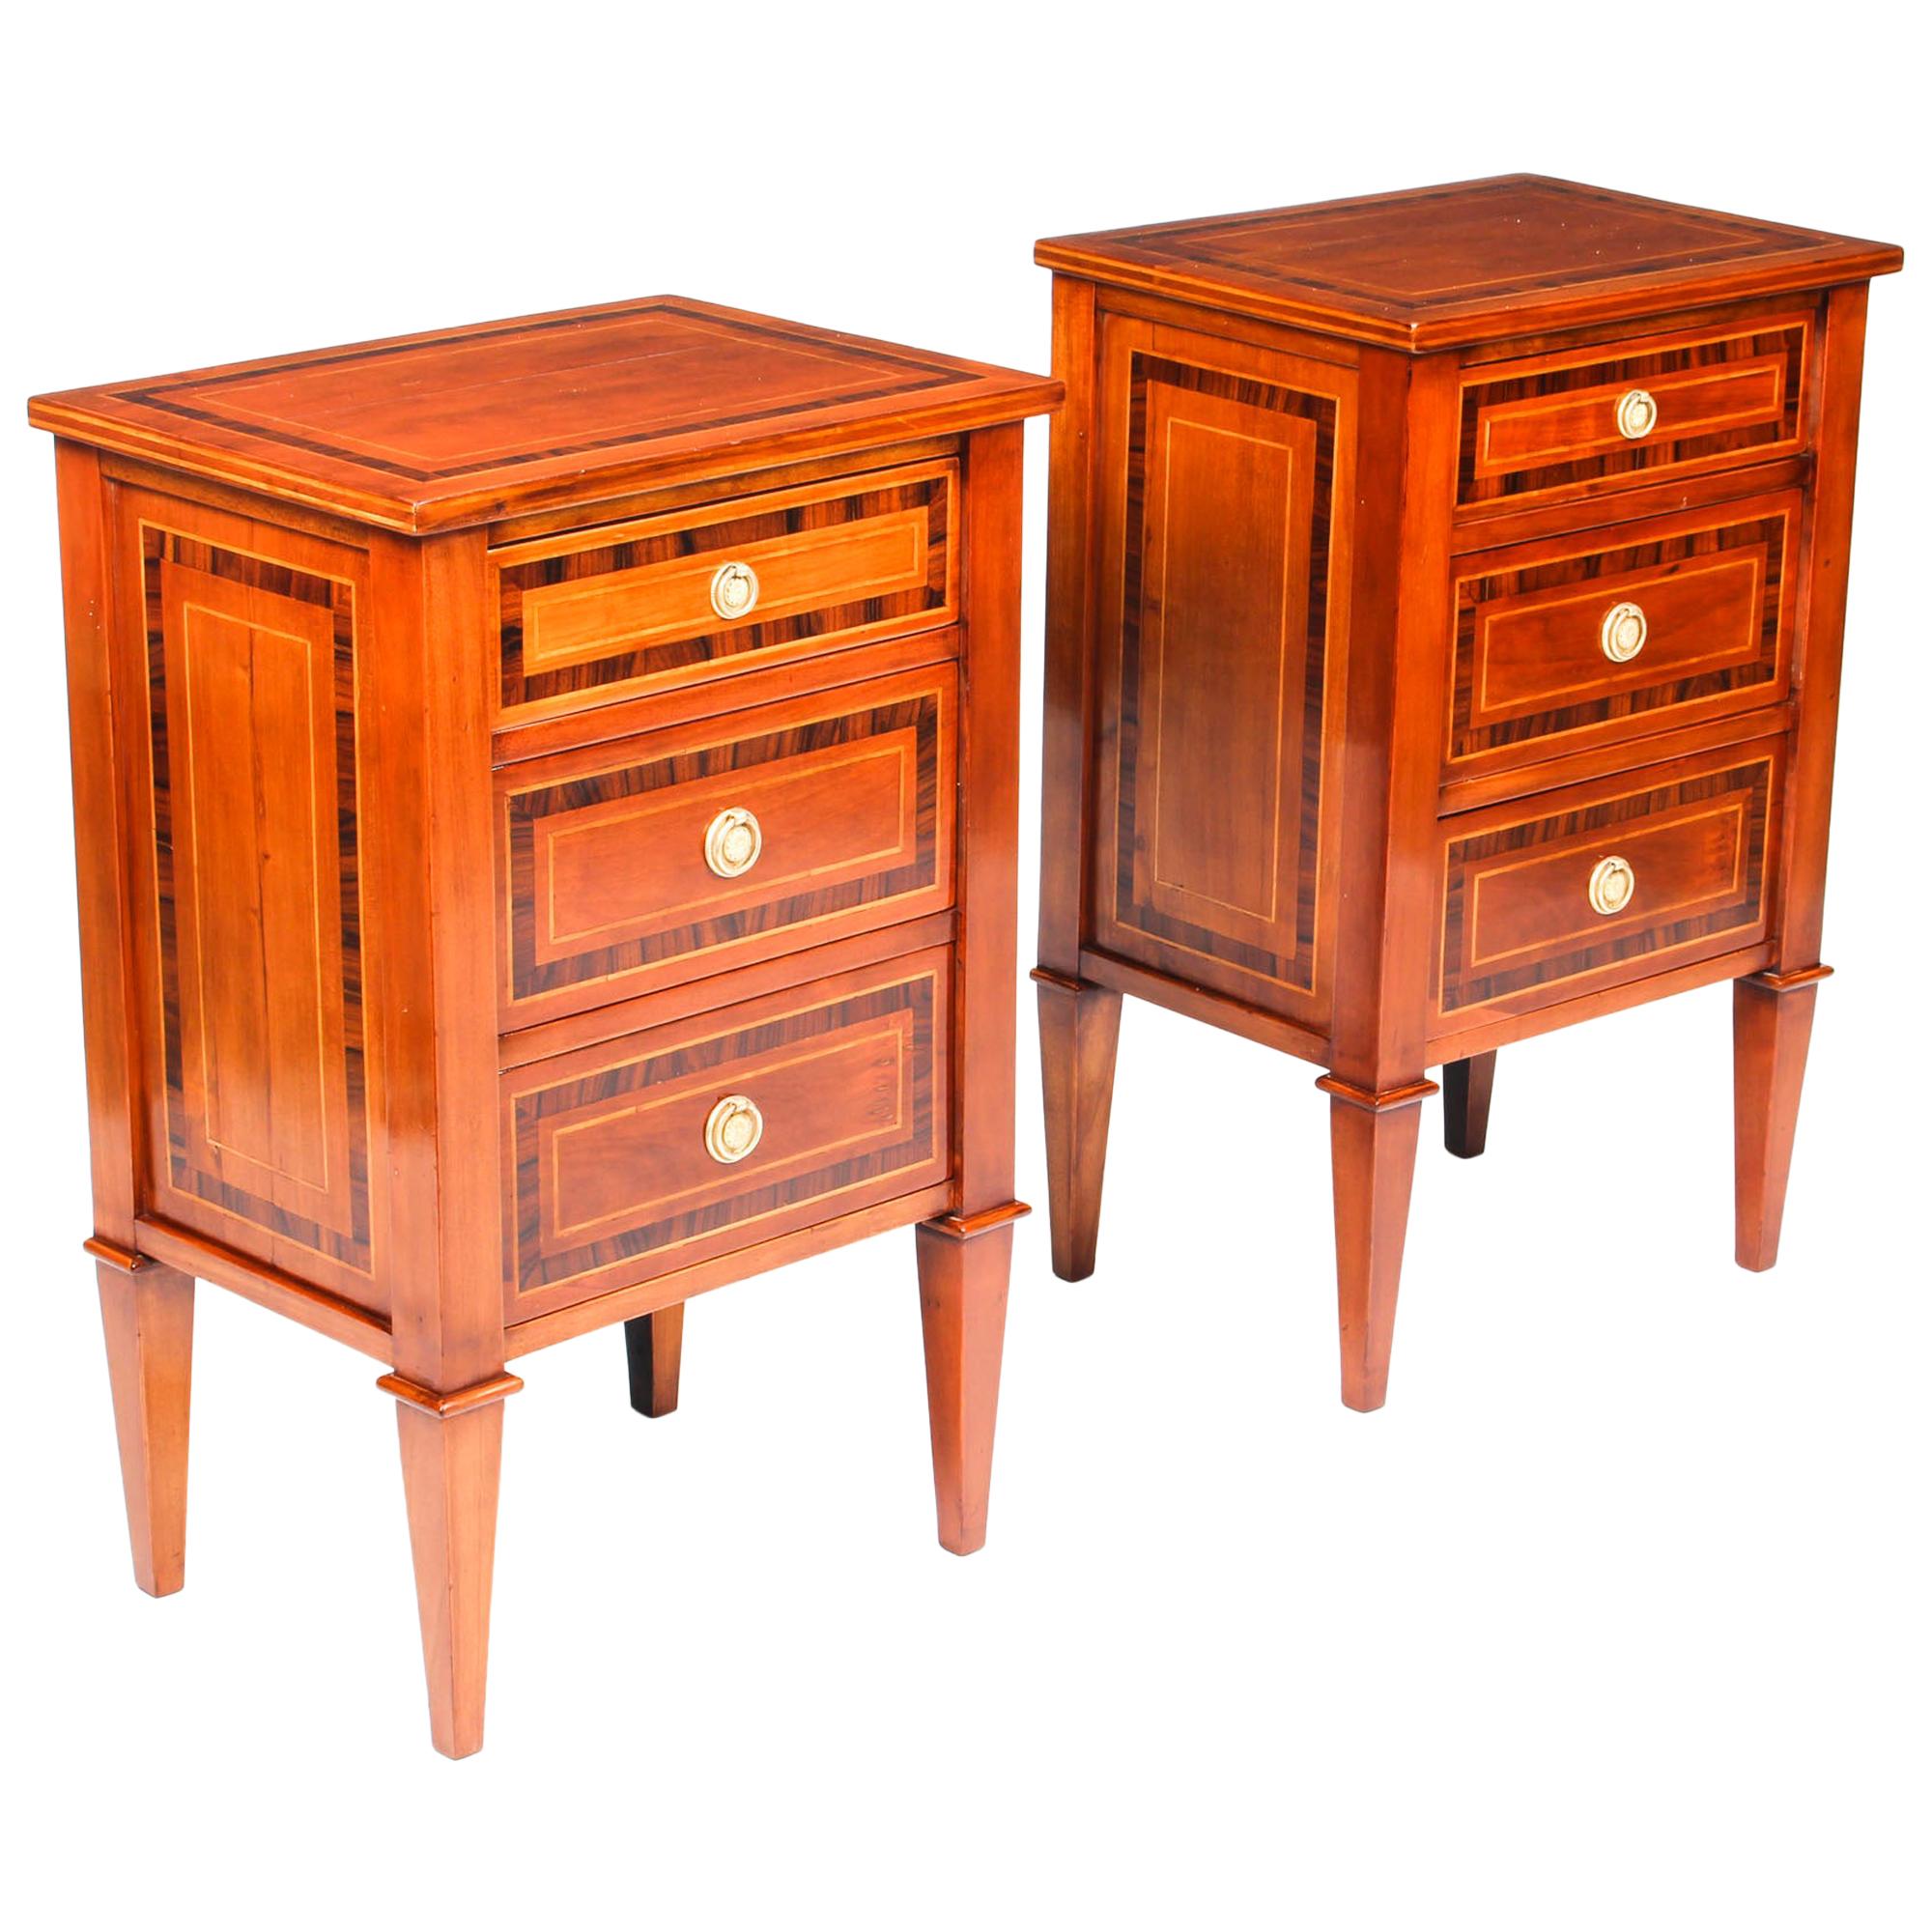 Antique Pair of Italian Flame Mahogany Bedside Chests Cabinets, 19th Century